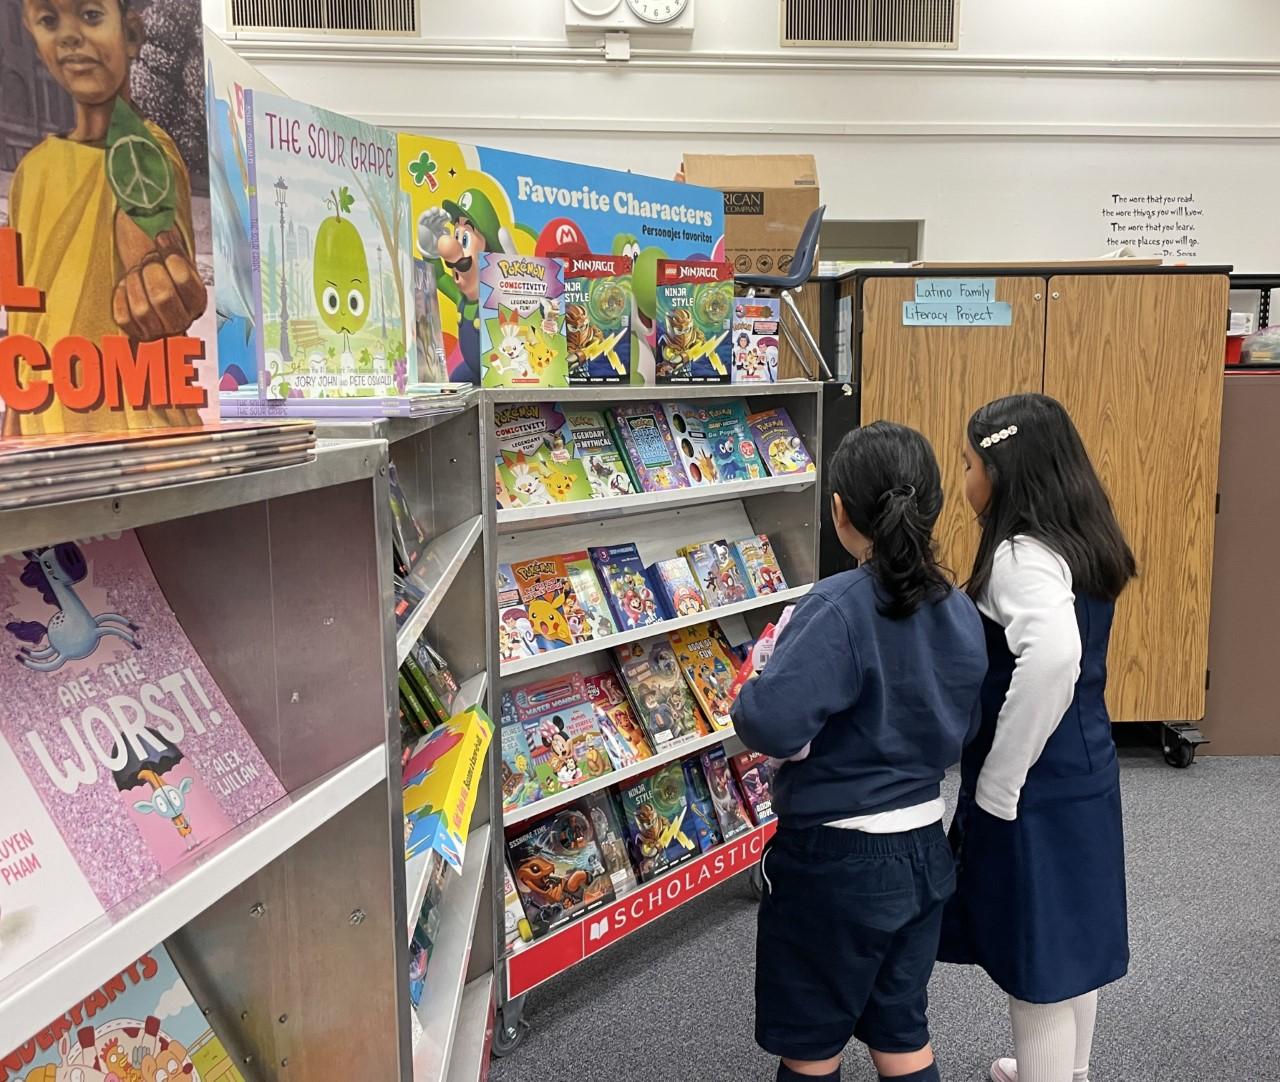 Spruce Elementary kicked off literacy month with the return of the Scholastic book fair on February 27.